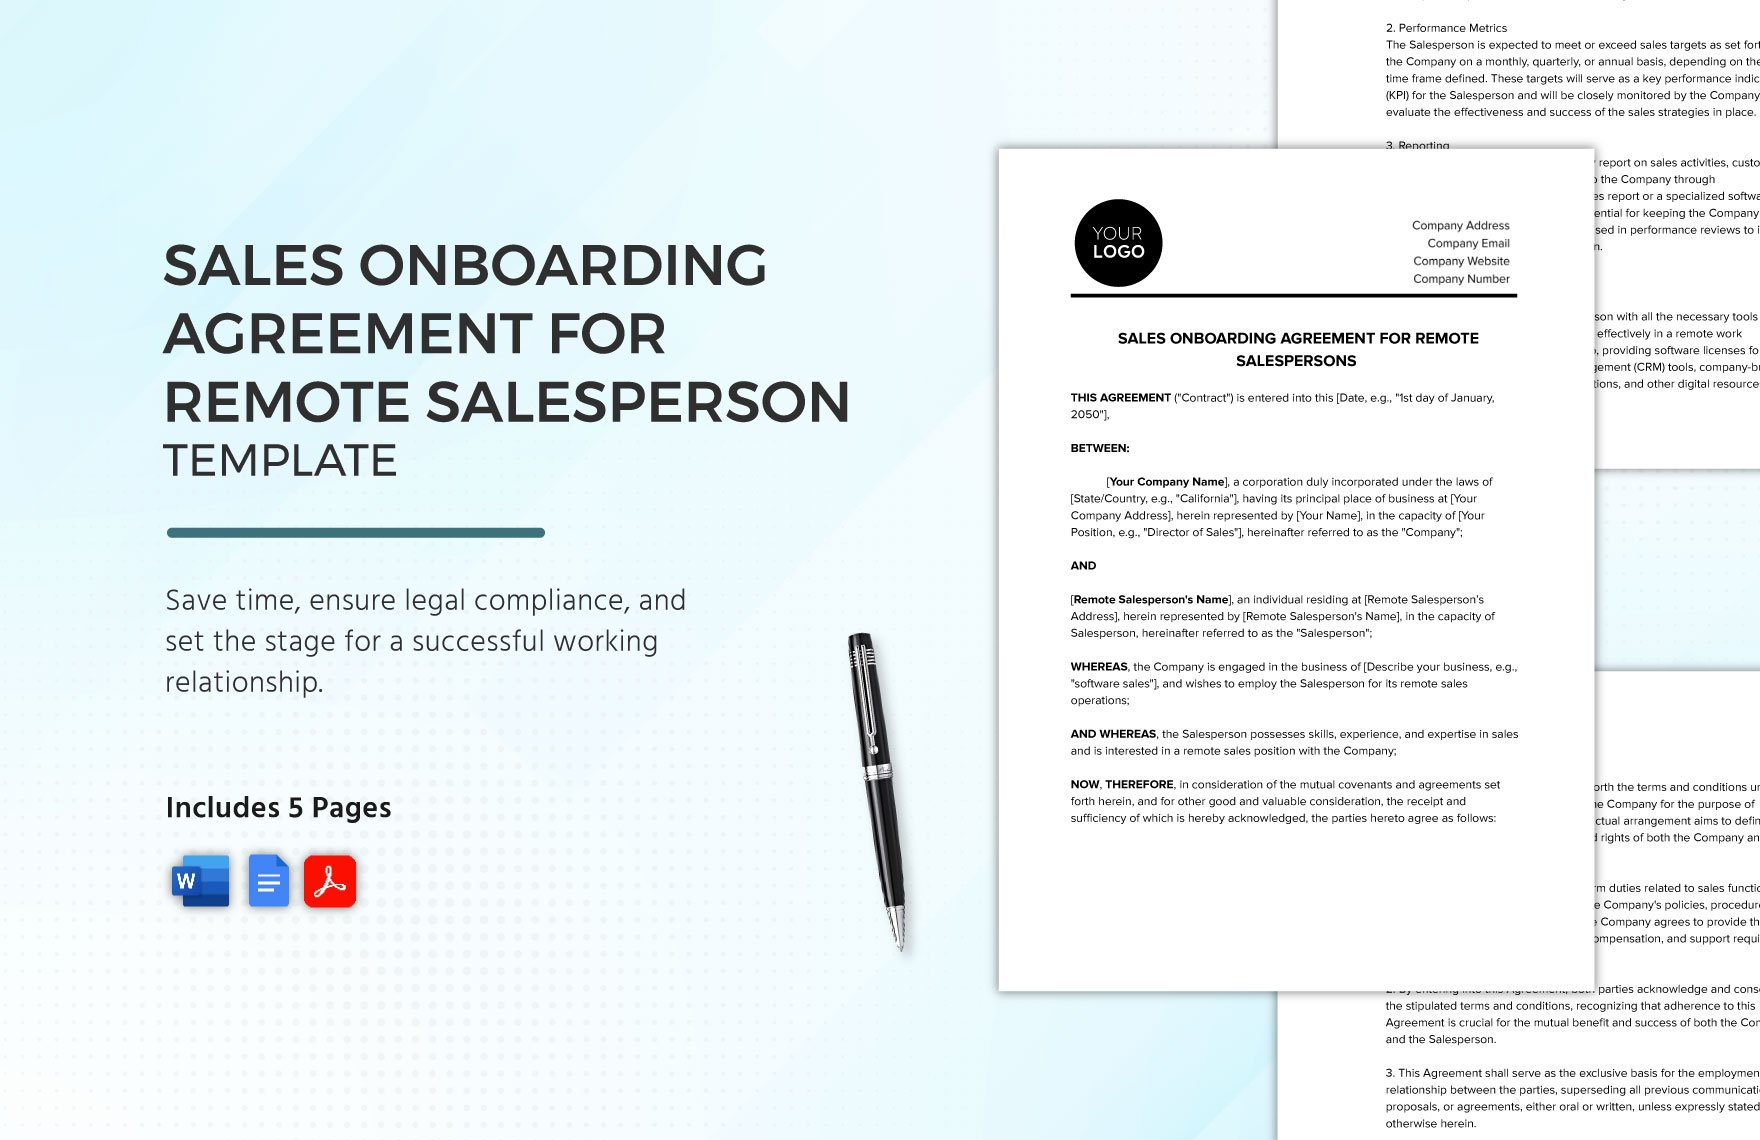 Sales Onboarding Agreement for Remote Salespersons Template